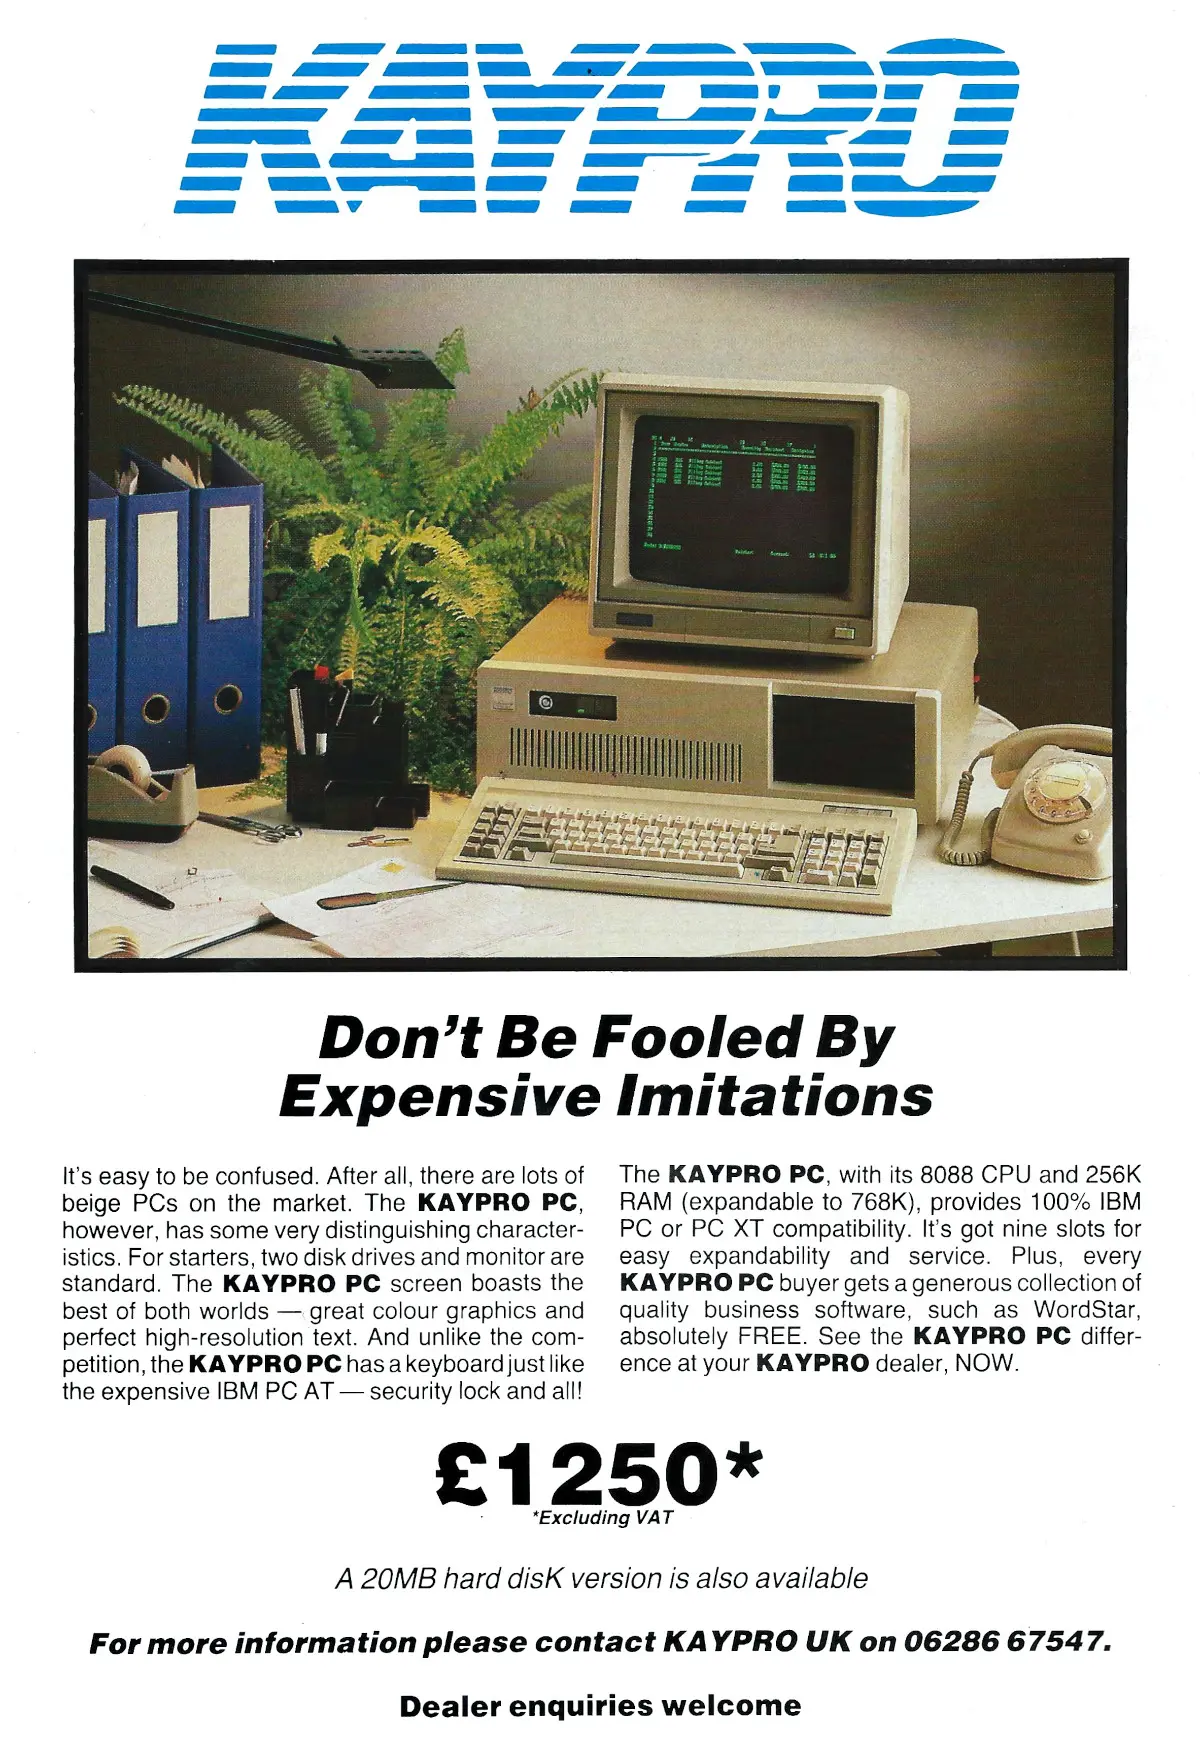 Kaypro Advert: Kaypro PC, from Personal Computer World, May 1986